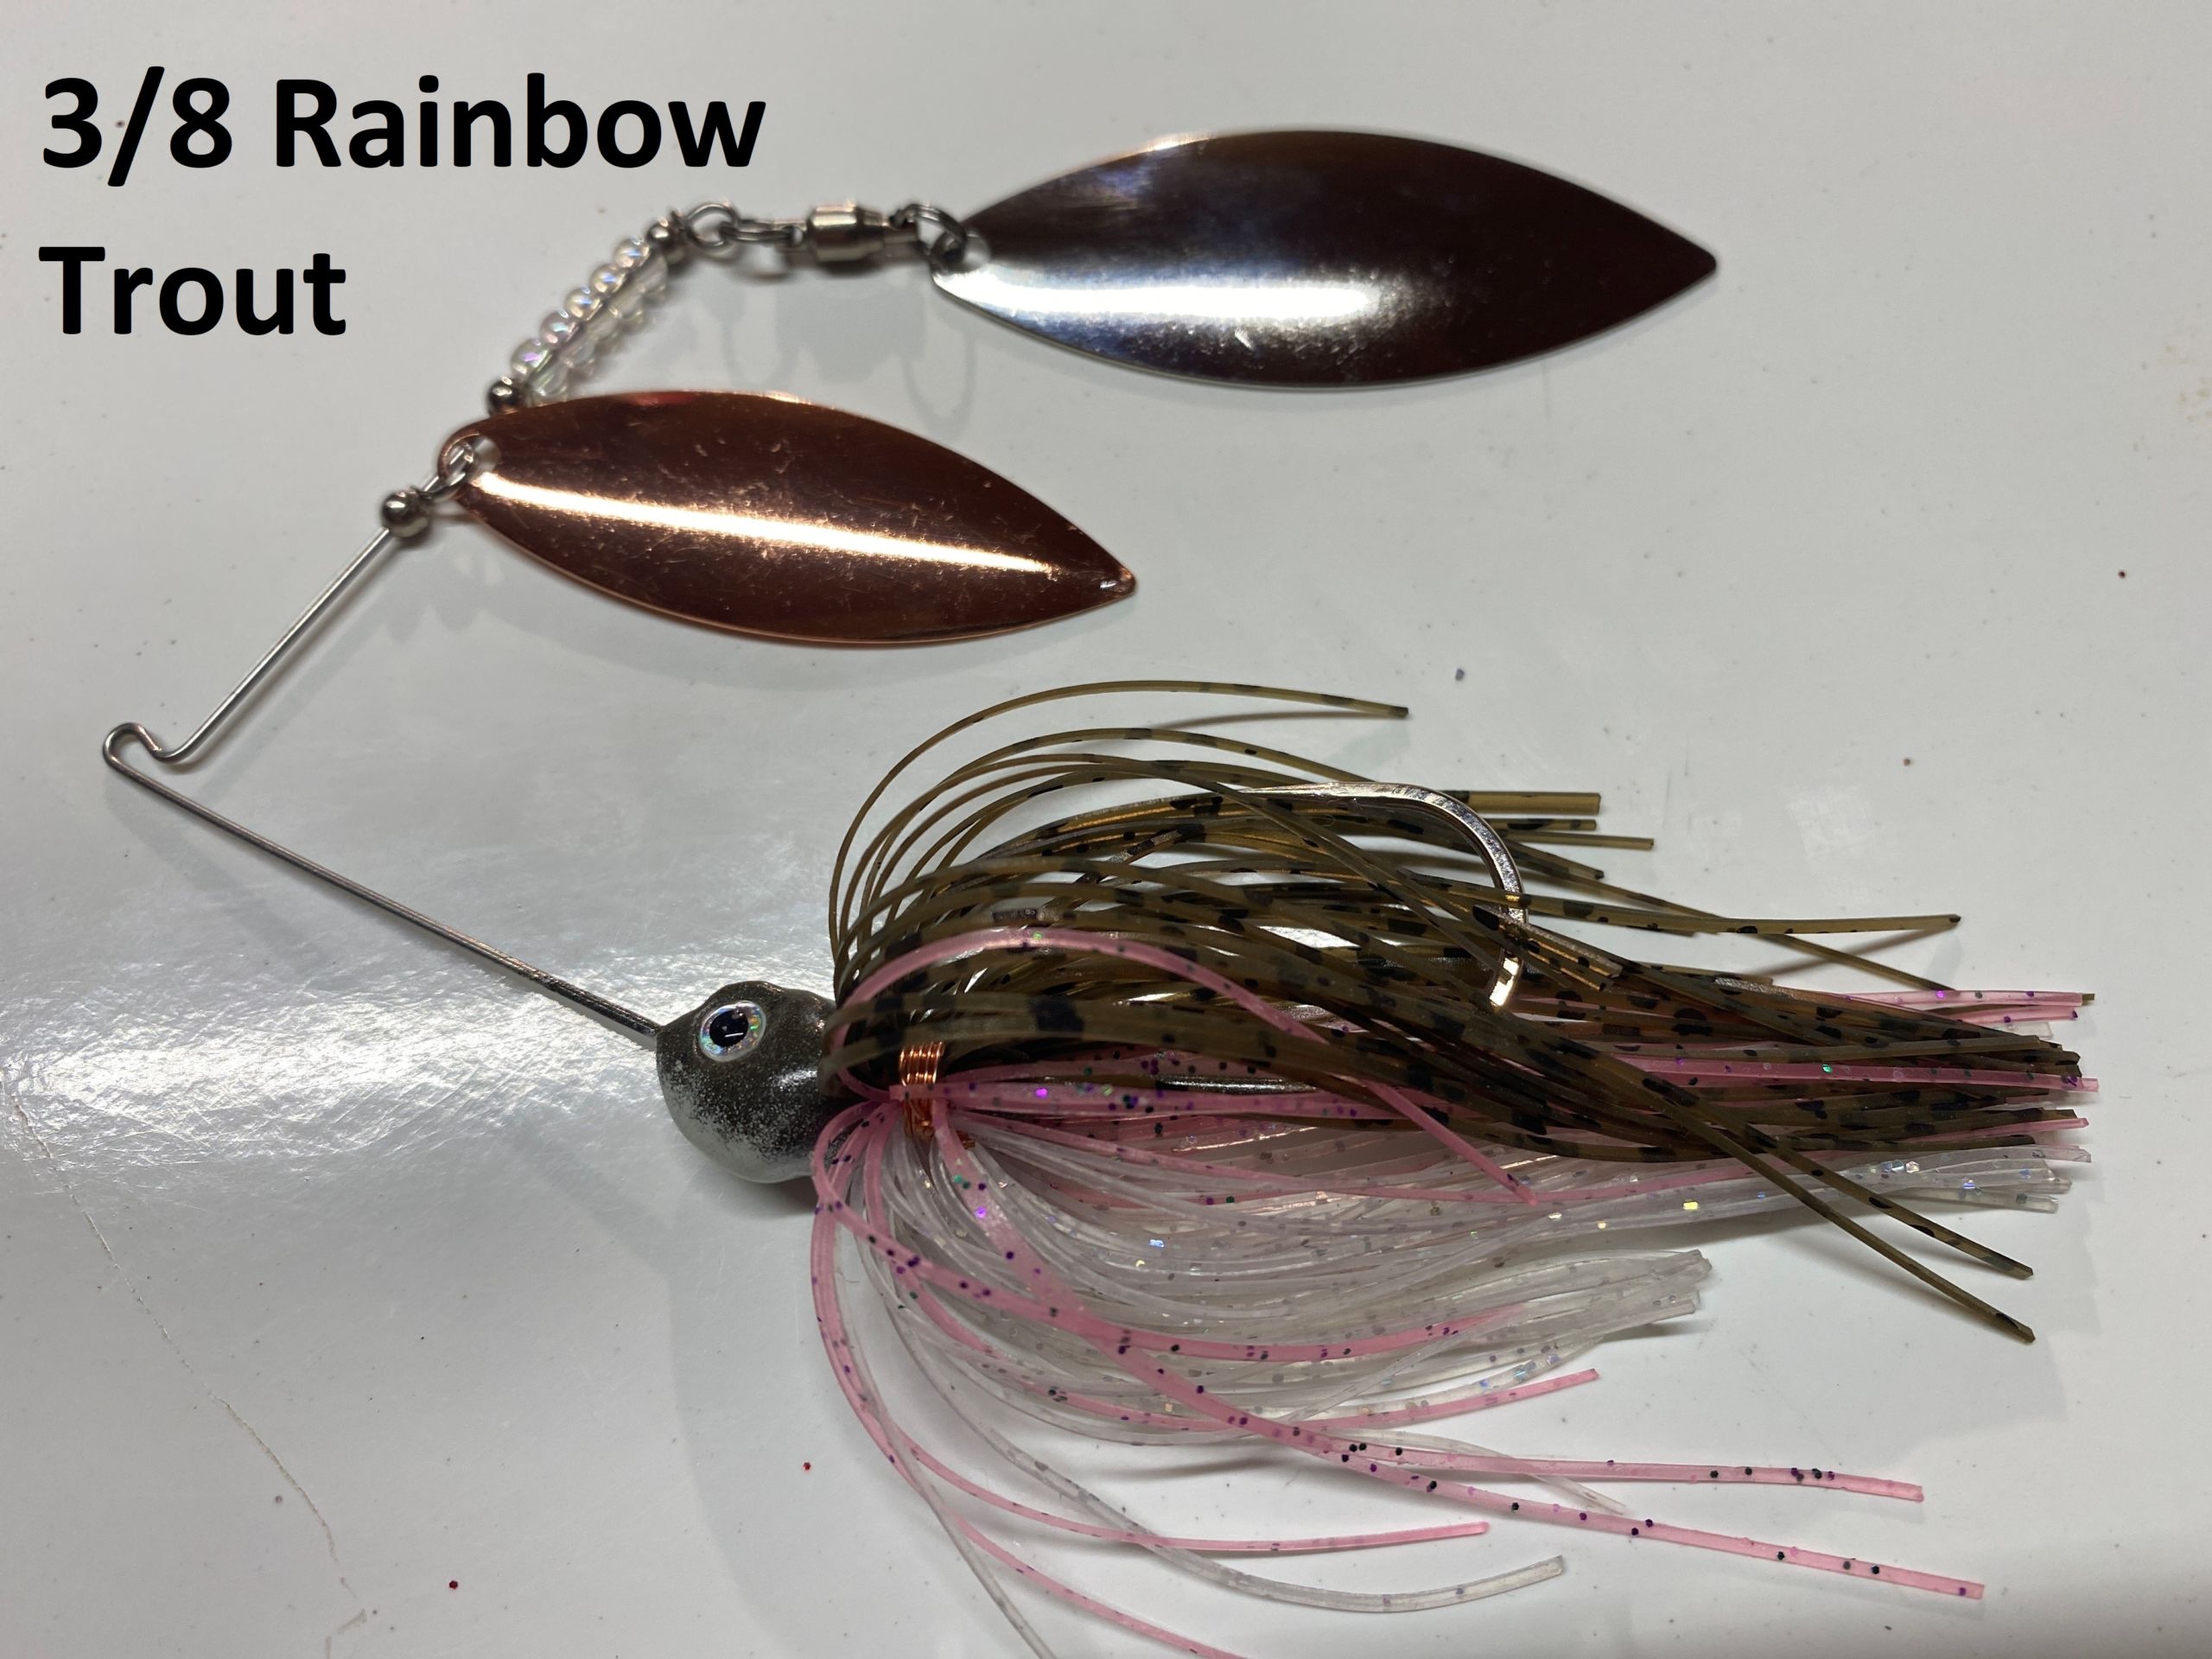 3/8 Rainbow Trout – Adrenaline Tackle Company 217-502-6880